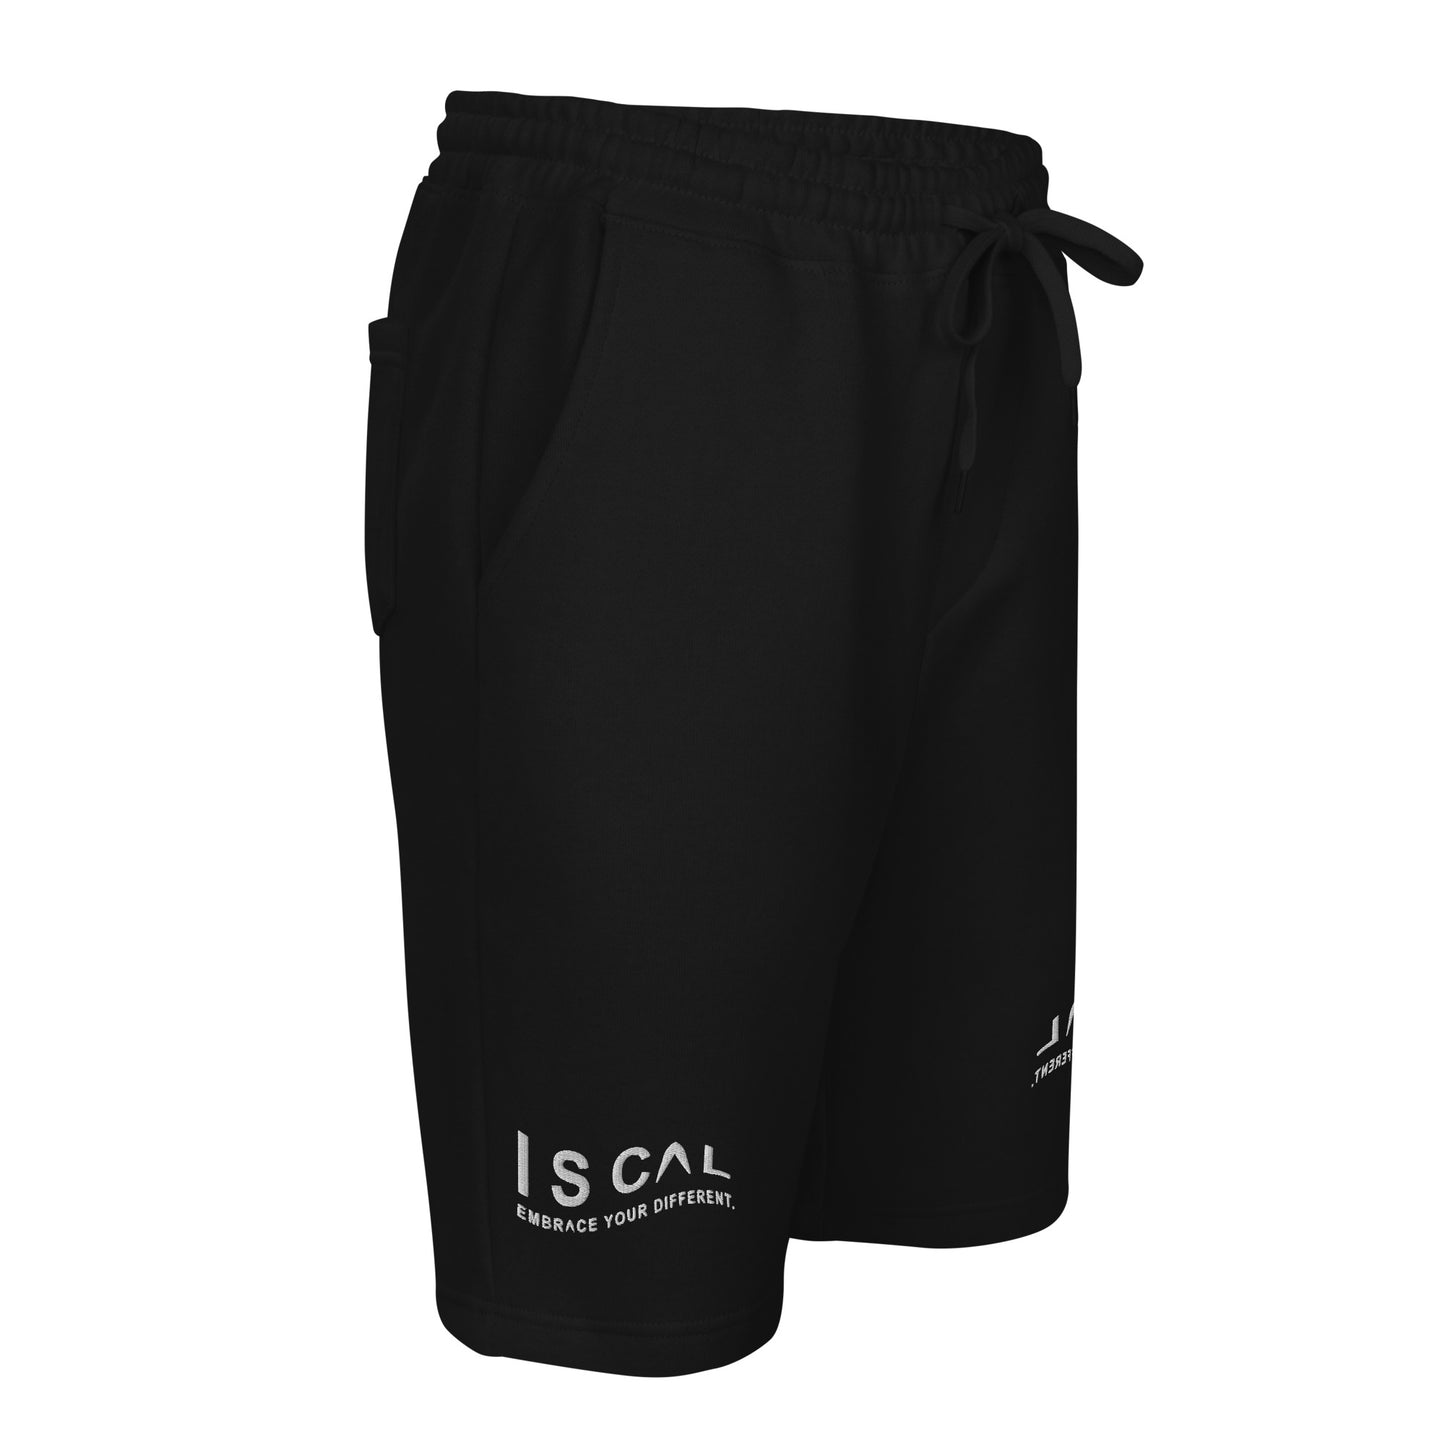 I S CAL EMBROIDERED SHORTS